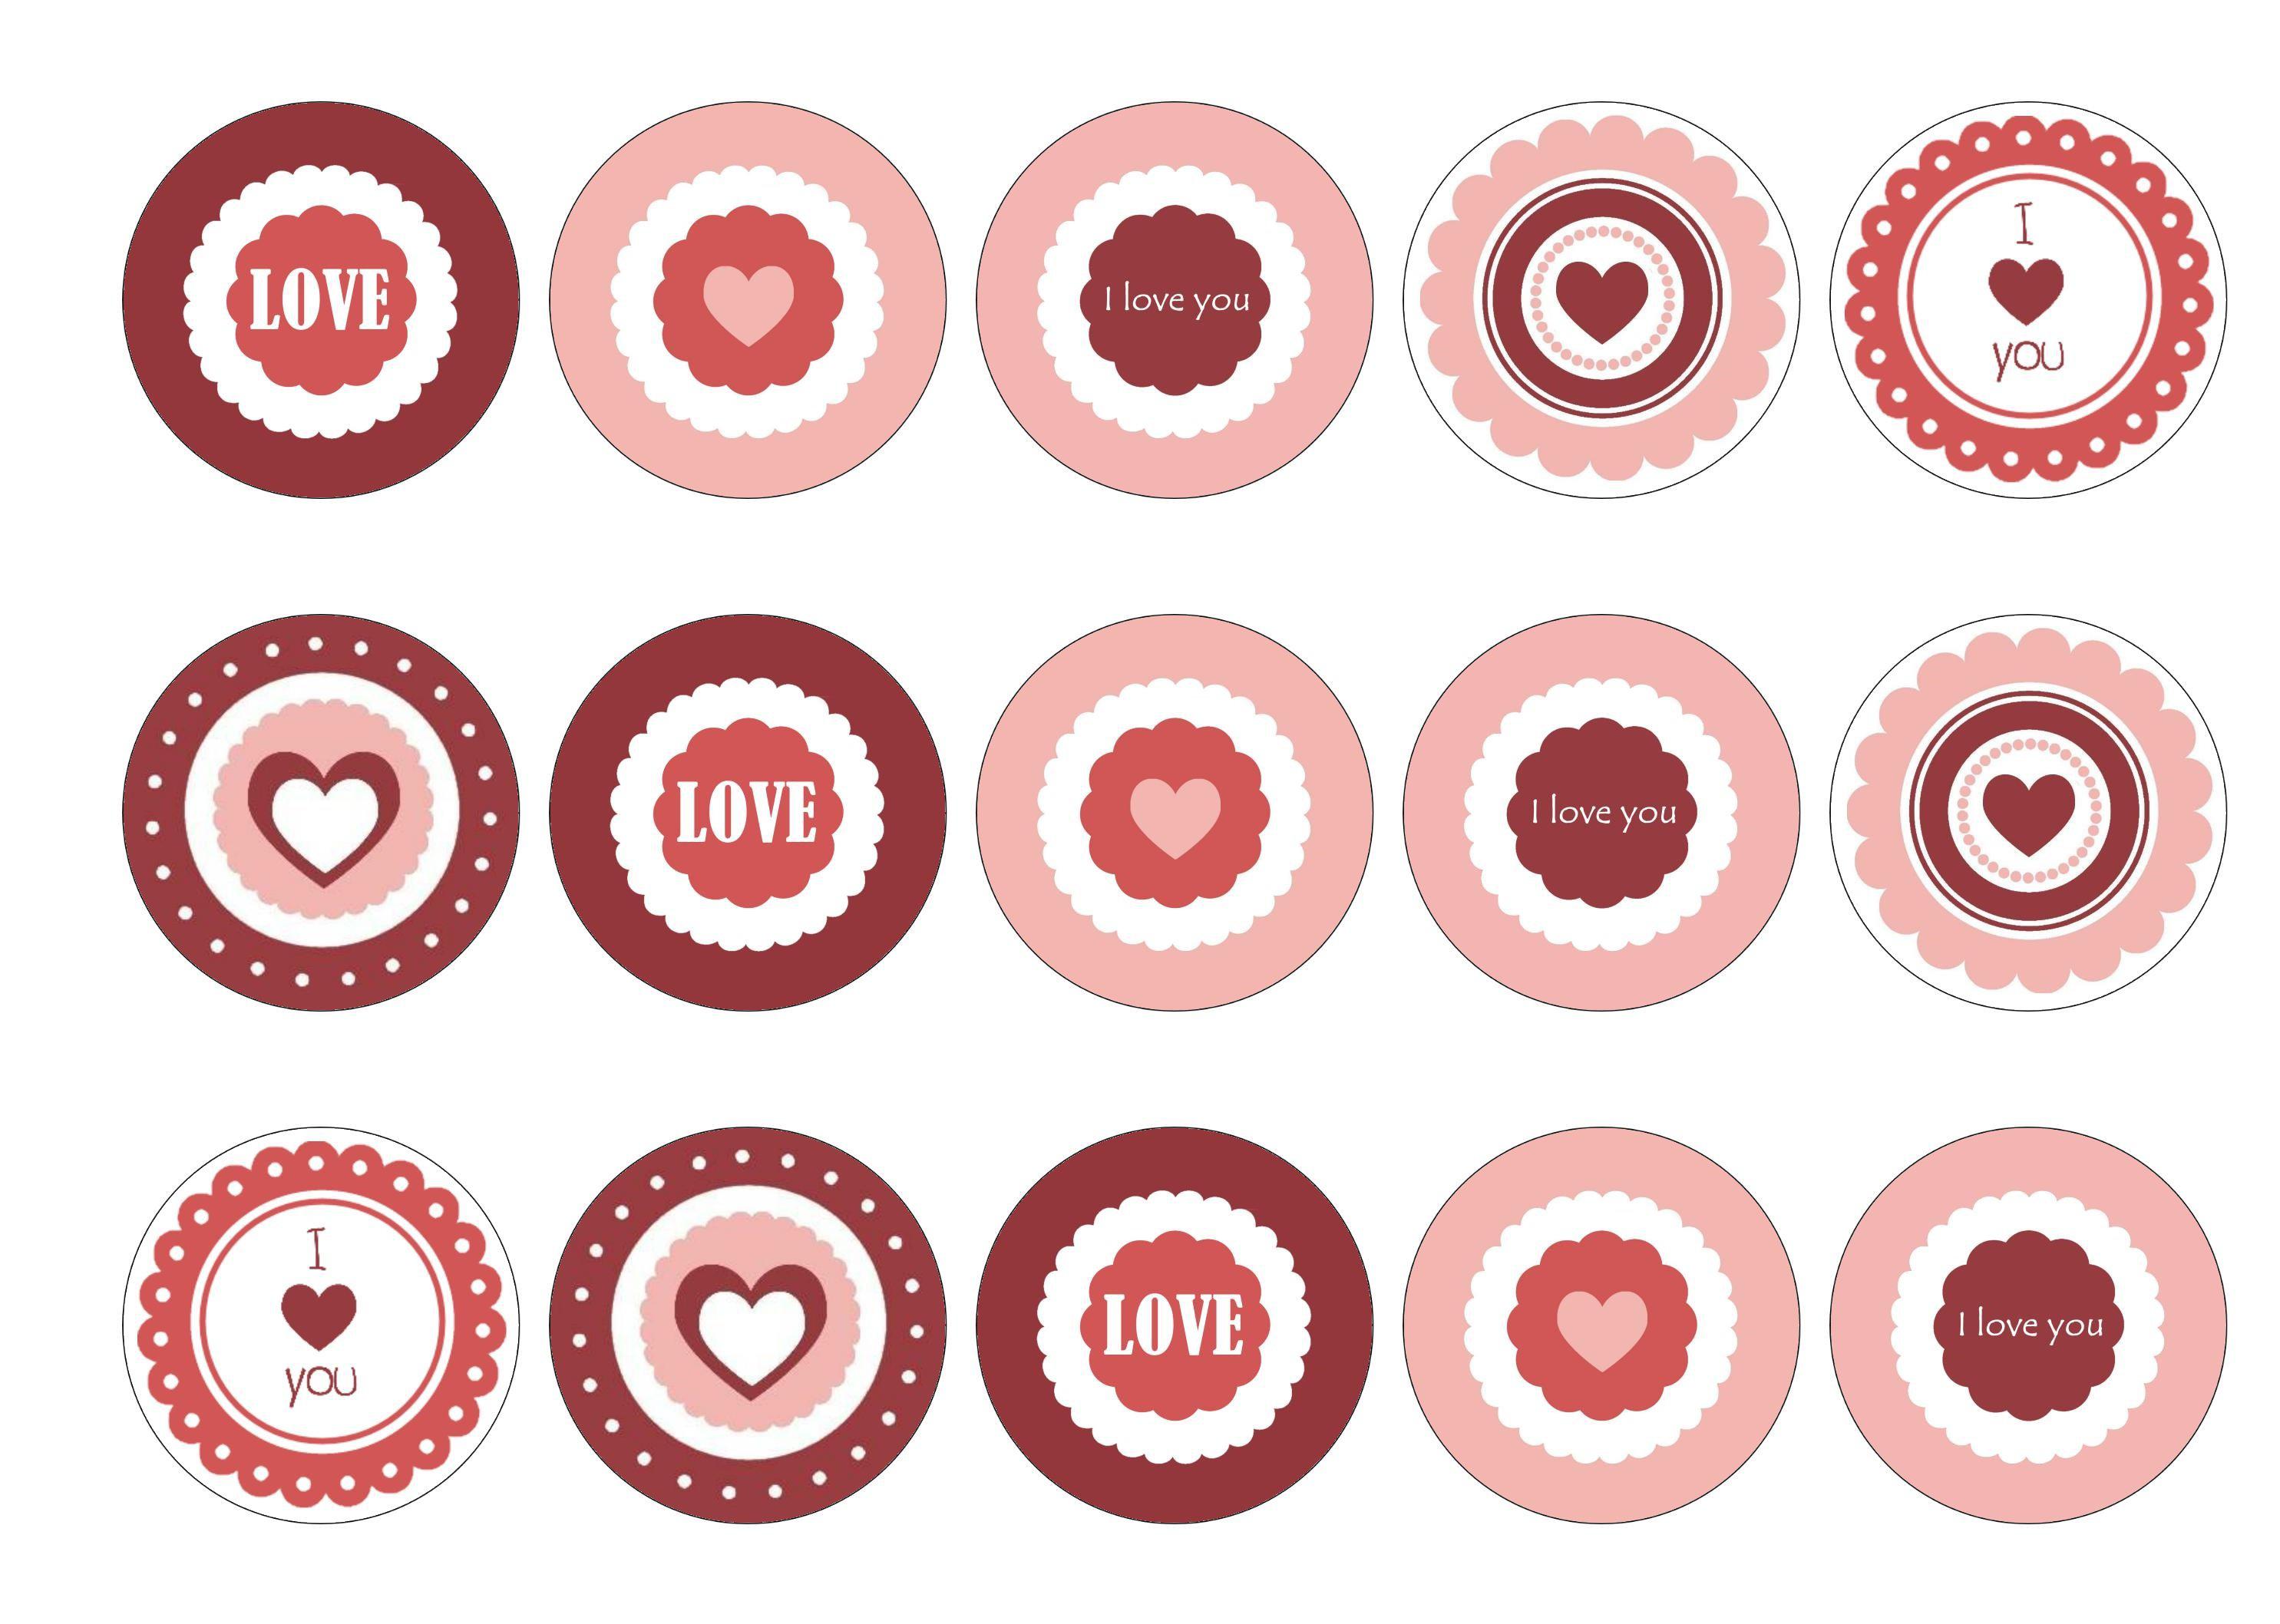 Edible cupcake toppers with mixed valentines images